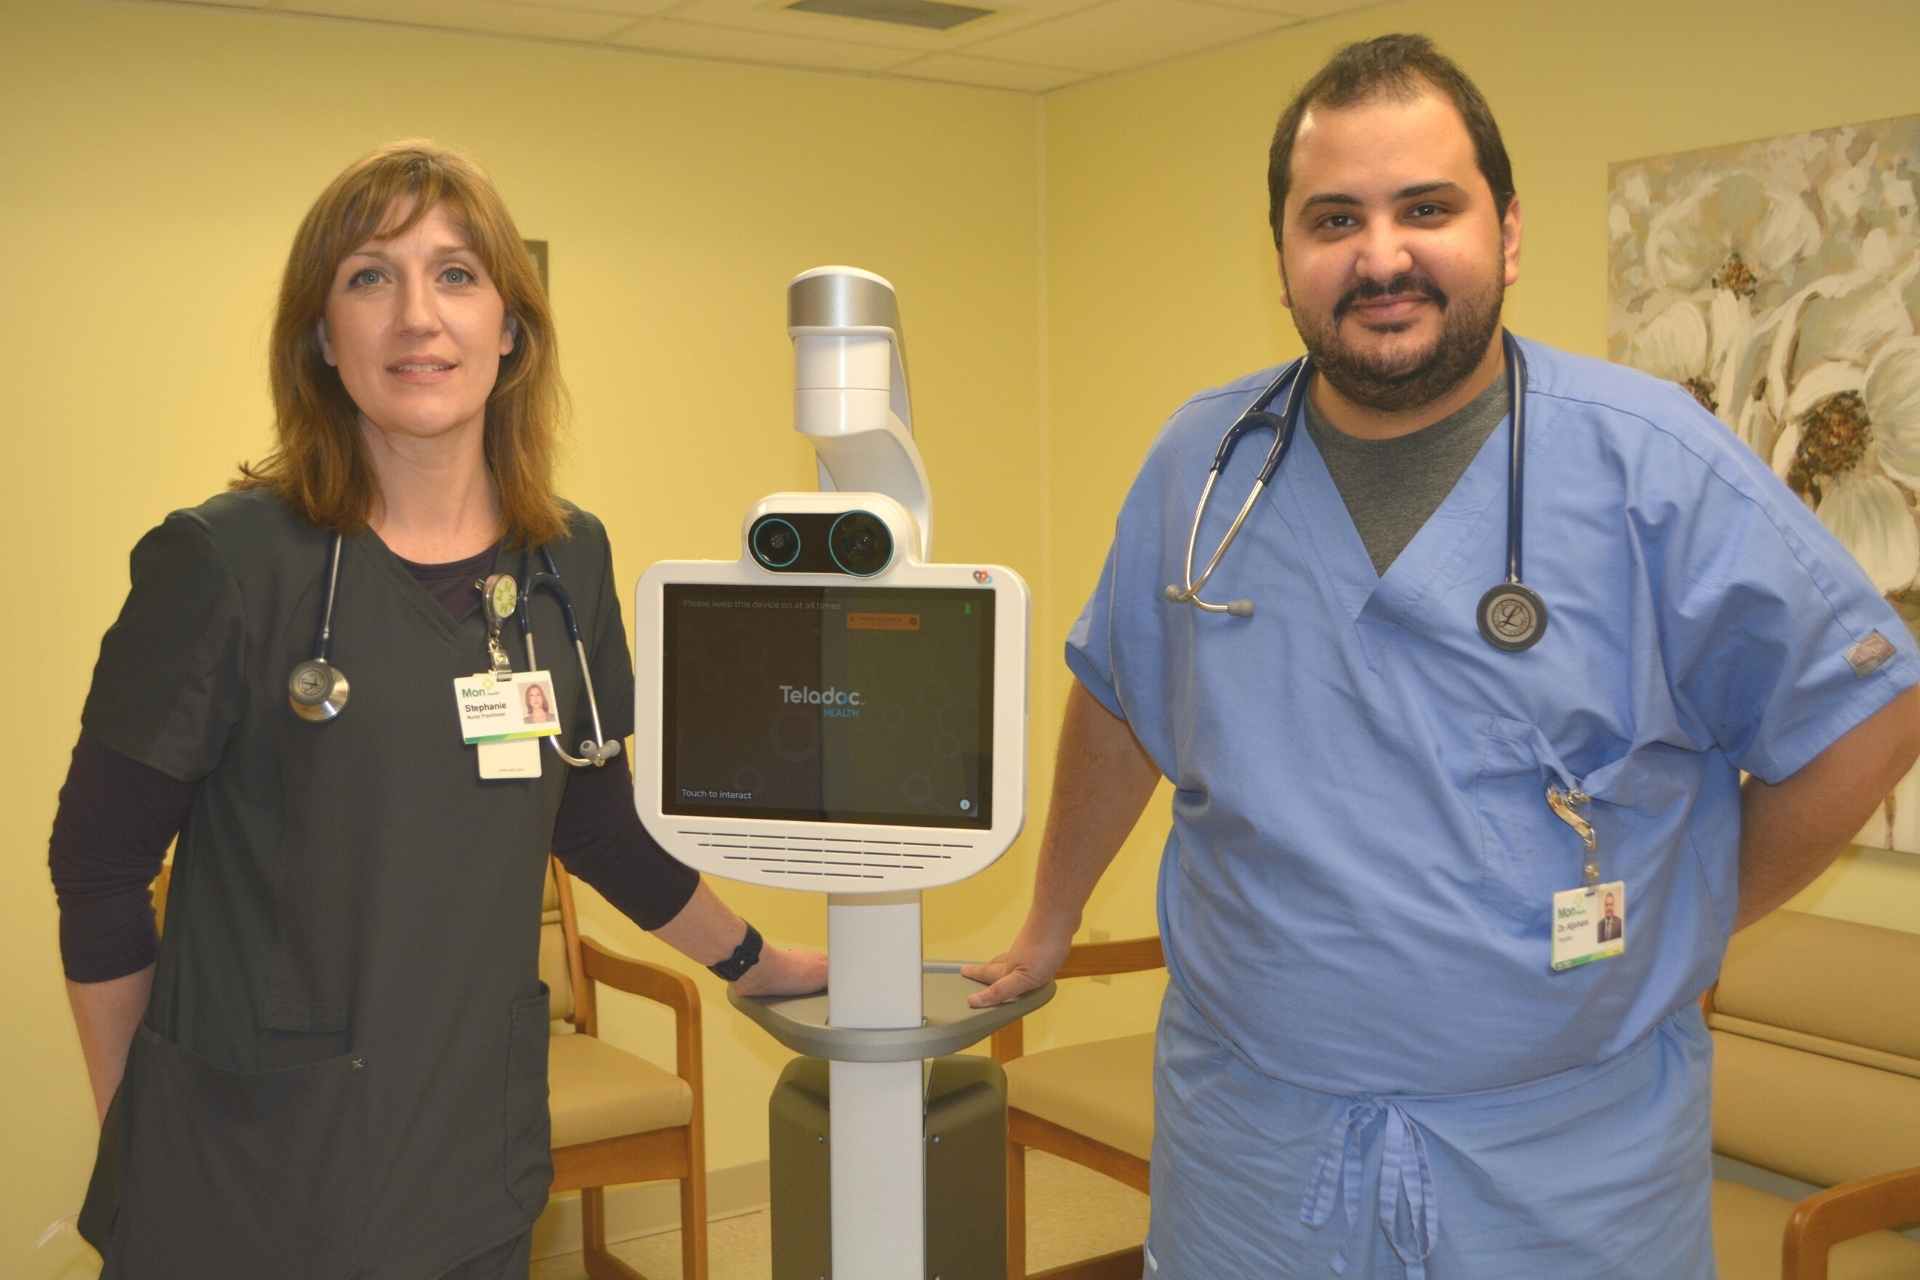 Nurse Practitioner Stephanie Barker and Dr. Sami Aljahoni are pictured above with the new Telemon system for use at Mon Health Stonewall Jackson Memorial Hospital Heart and Vascular Center. The new TeleMon system allows a bedside examination by a cardiologist via the internet when the physician is not physically available.